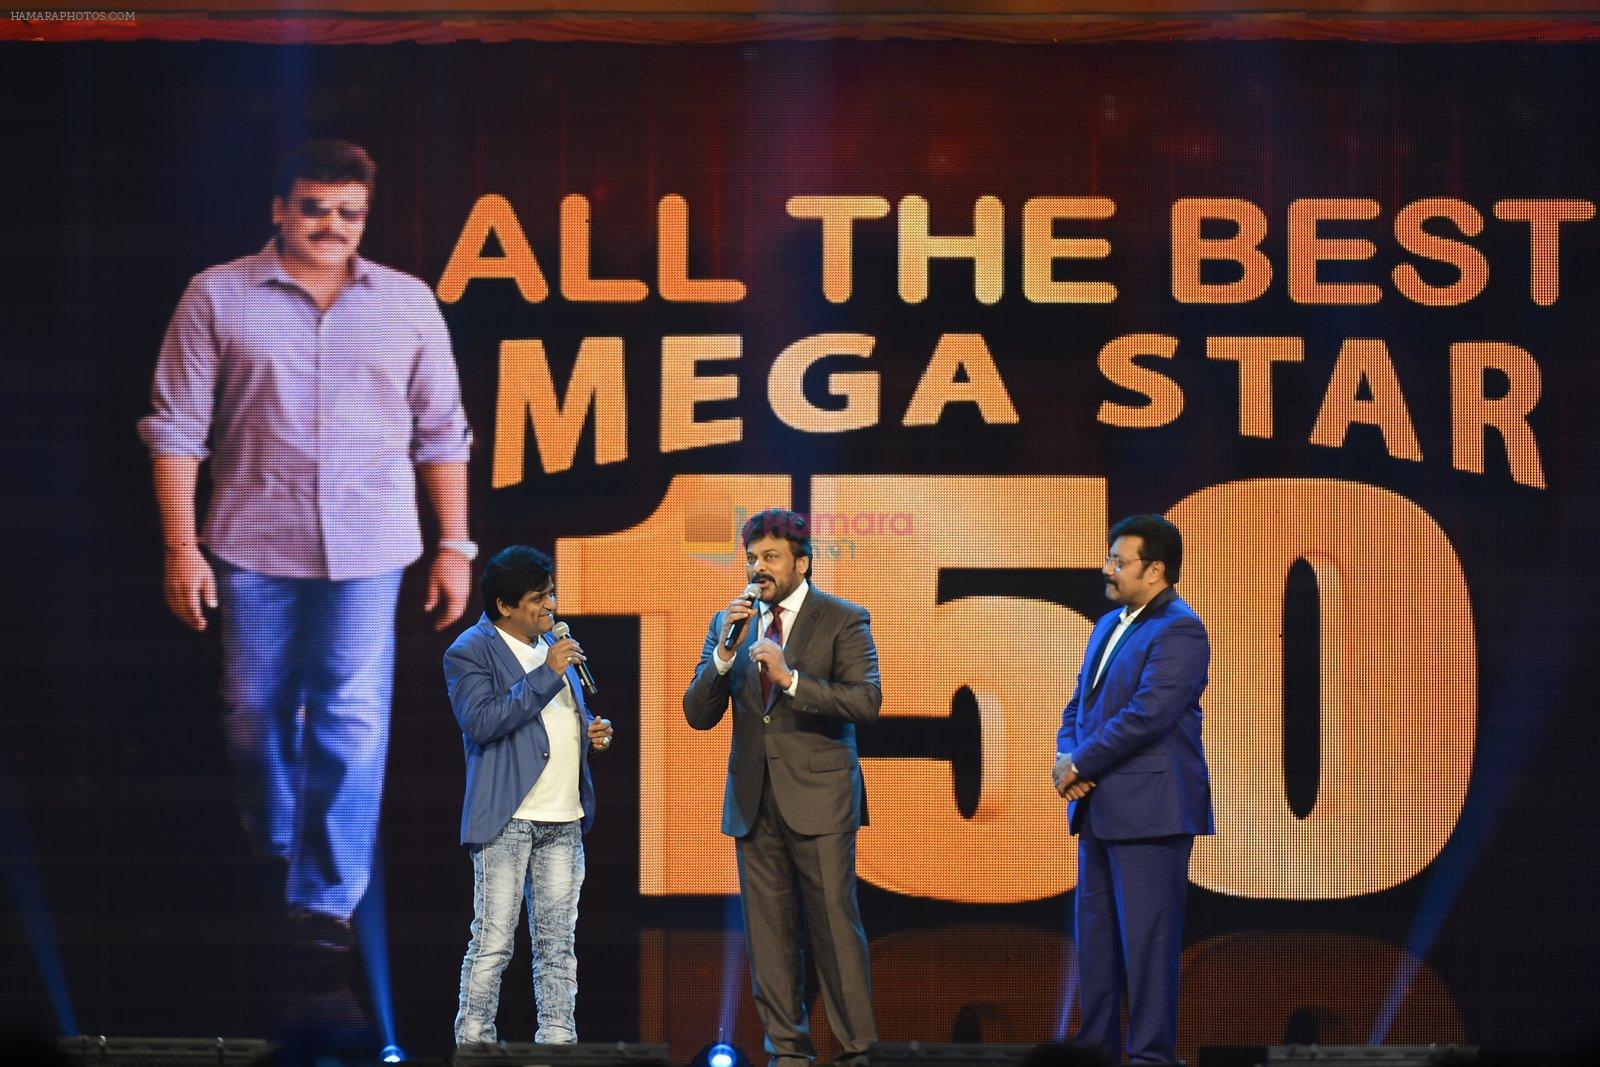 Chiranjeevi at SIIMA 2016 DAY 1 red carpet on 30th June 2016